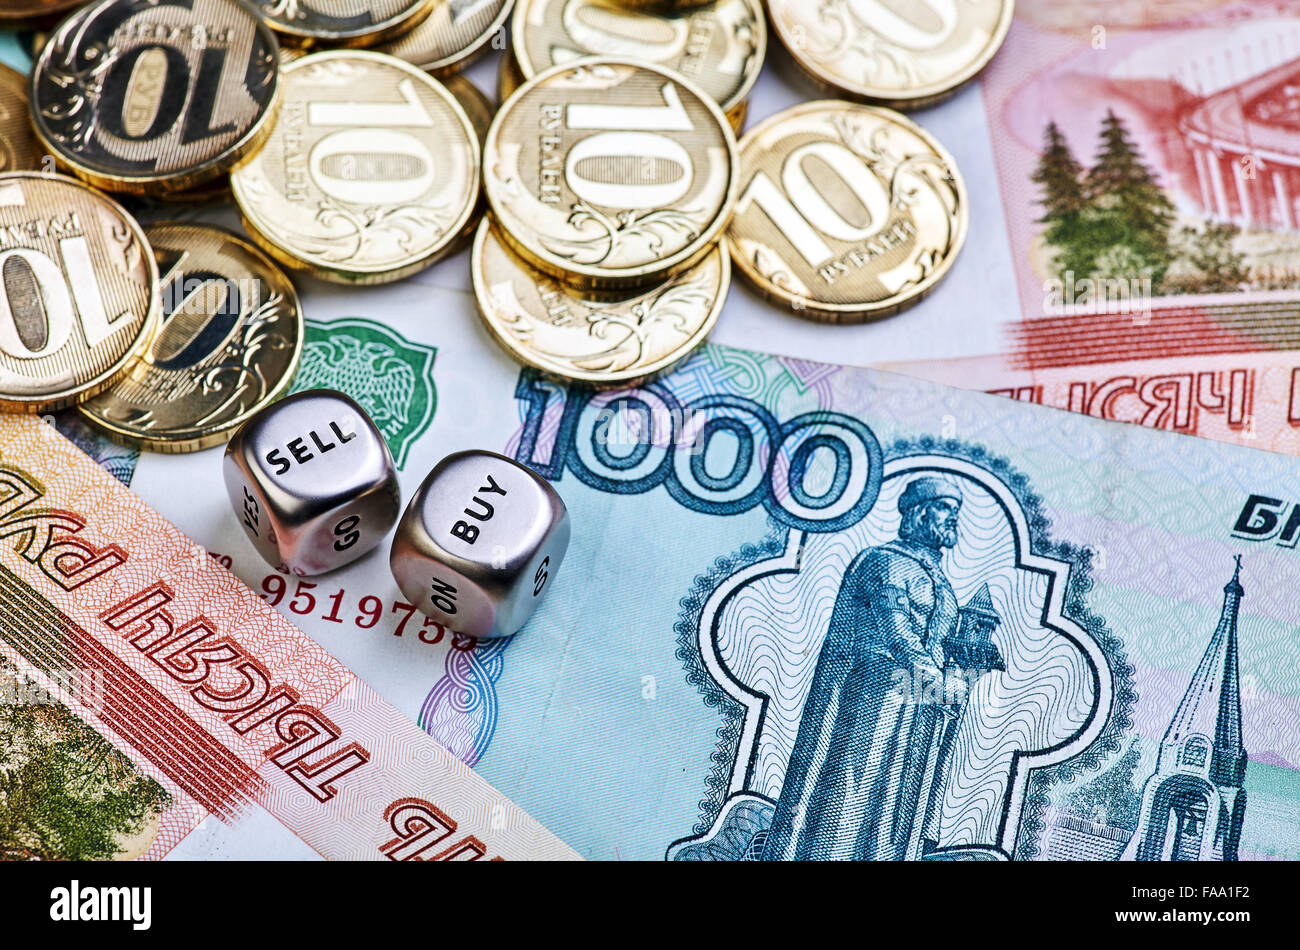 Coins, ruble banknotes and dices cubes. Selective focus Stock Photo